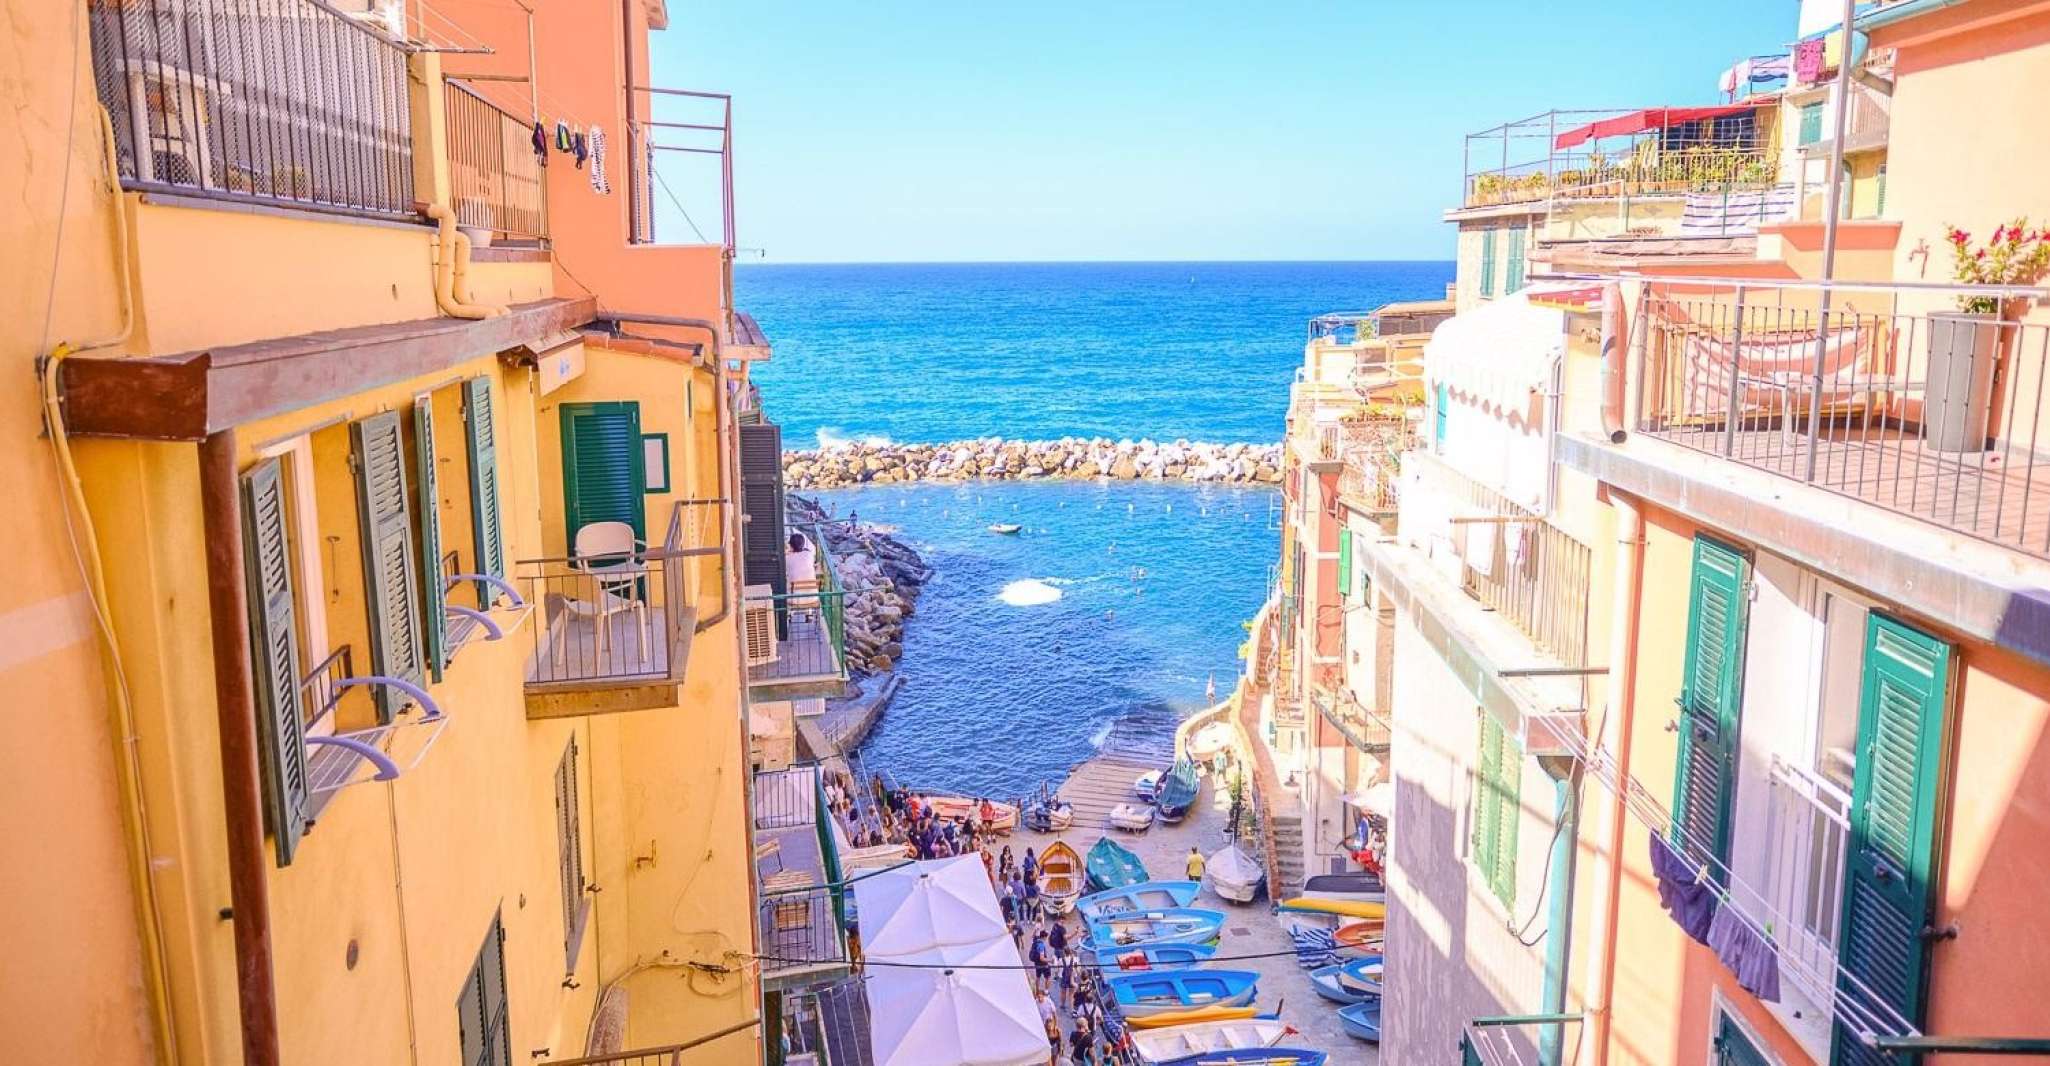 From Florence, Seaside Beauty Day Trip to Cinque Terre - Housity